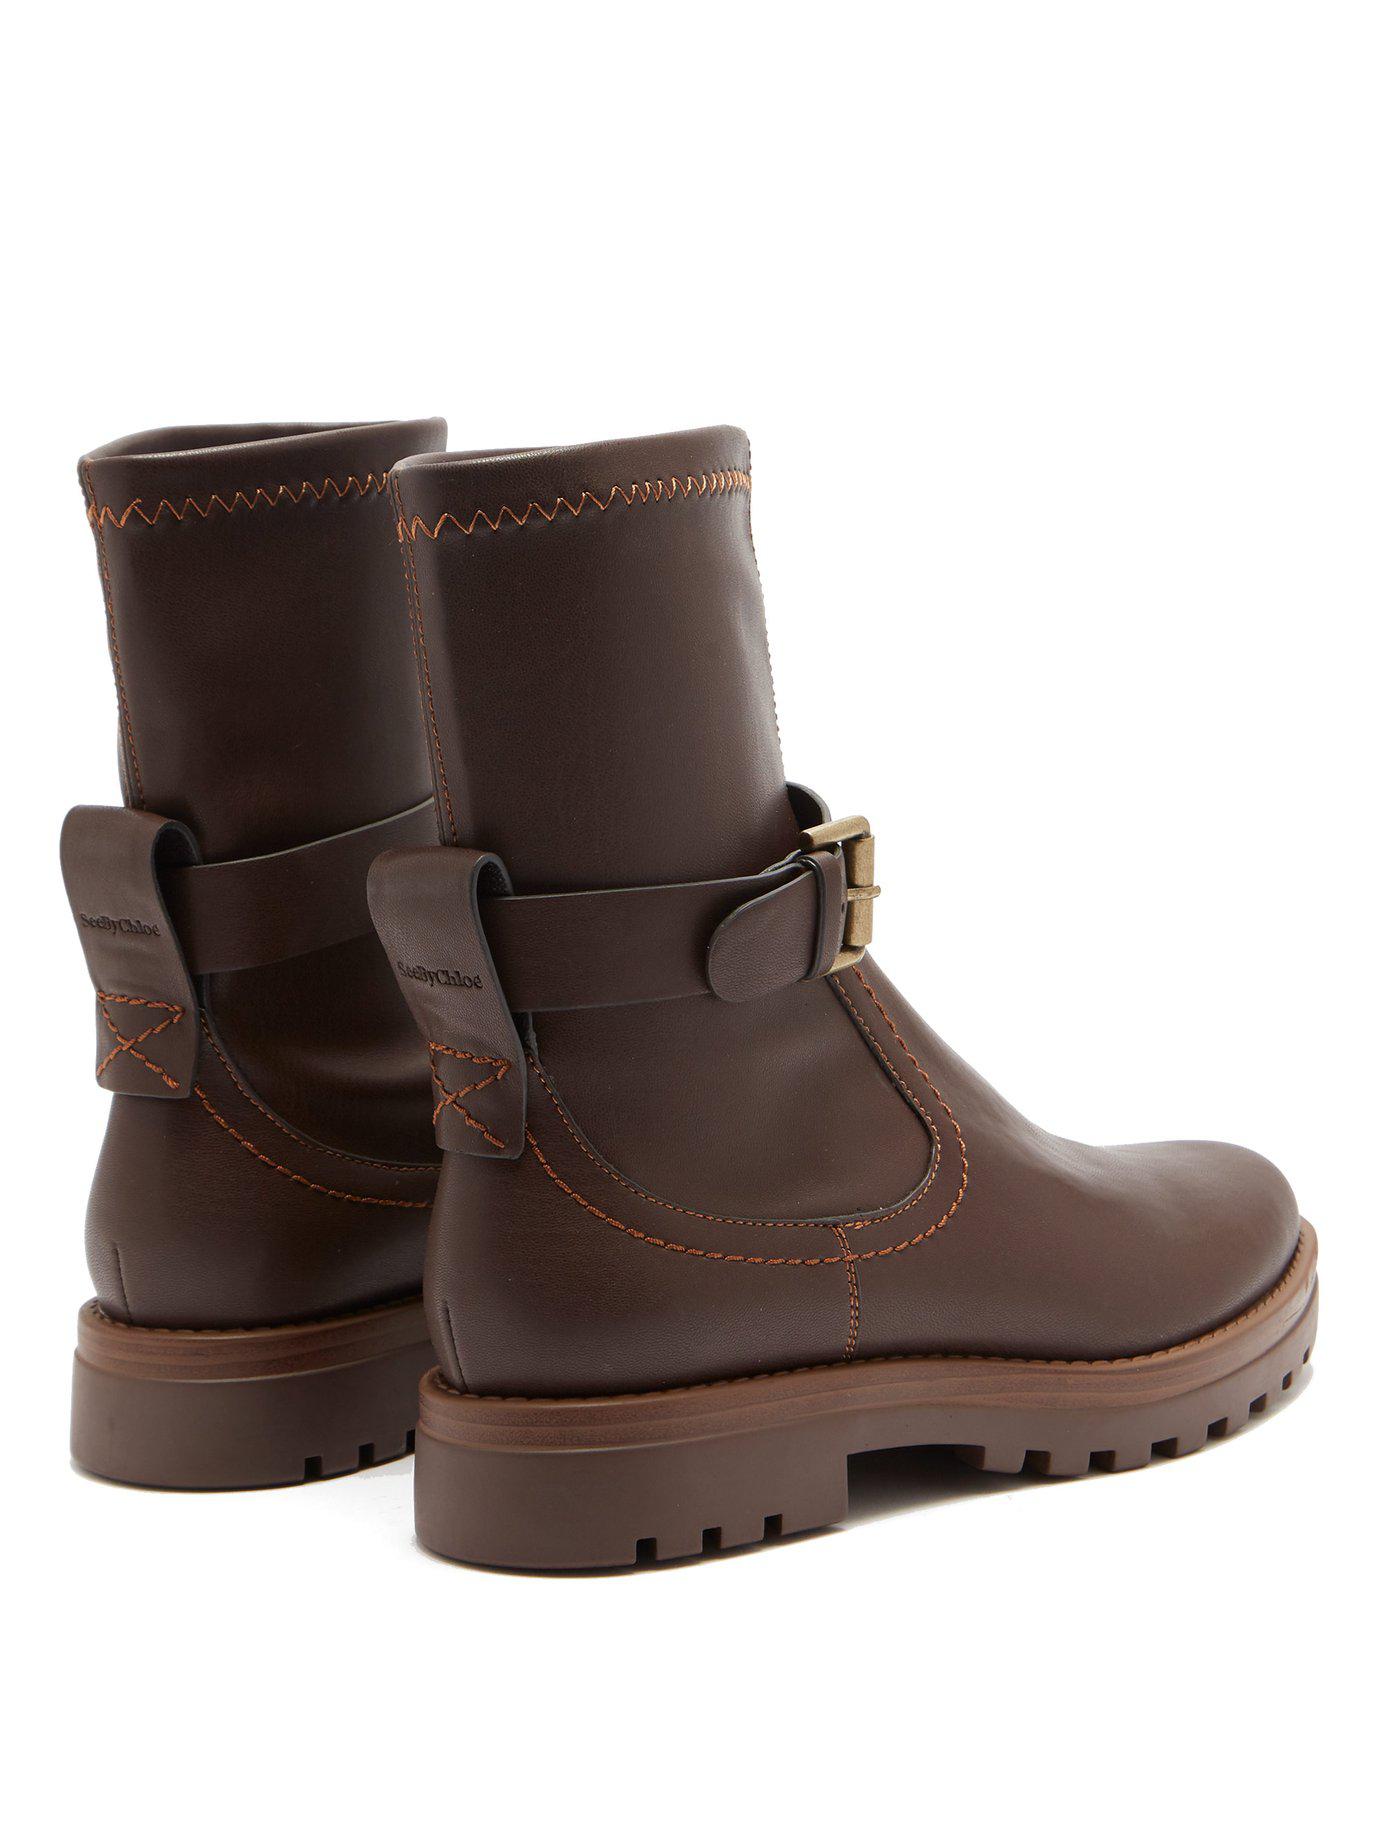 See By Chloé Trek Buckled Leather Ankle Boots in Brown - Lyst